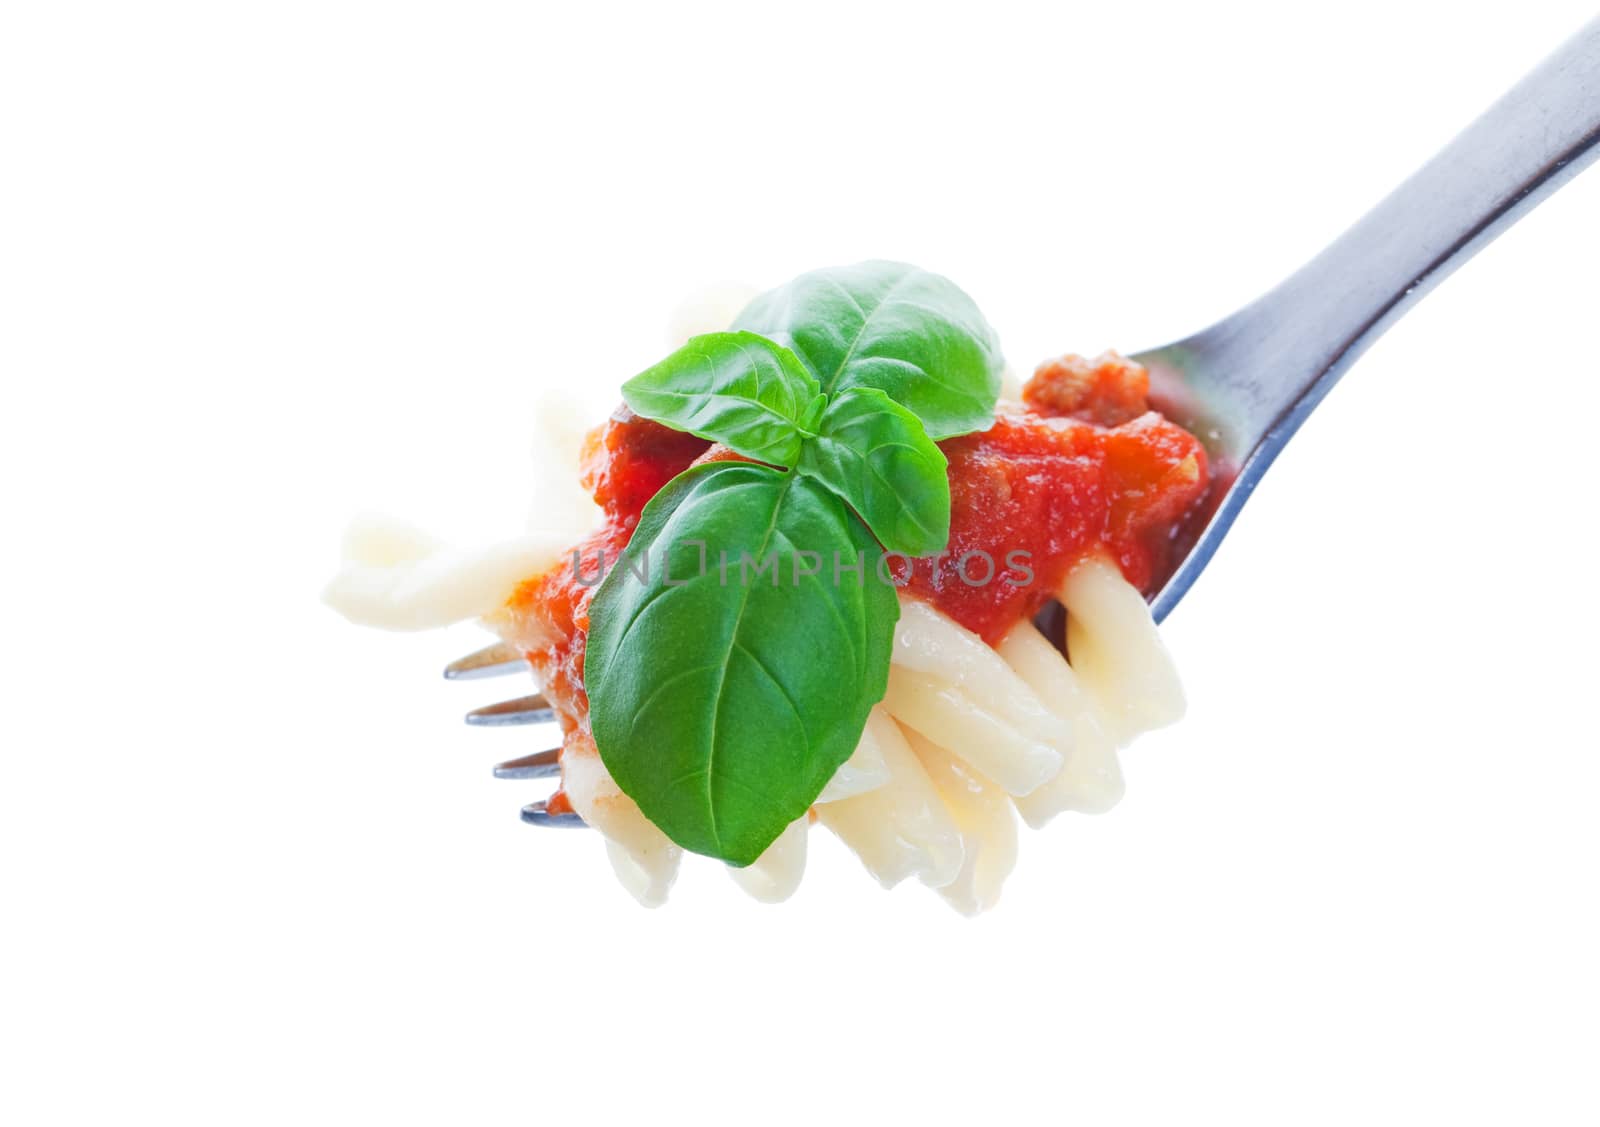 Fork full of pasta and tomato sauce with a fresh basil garnish.  Shot on white background.